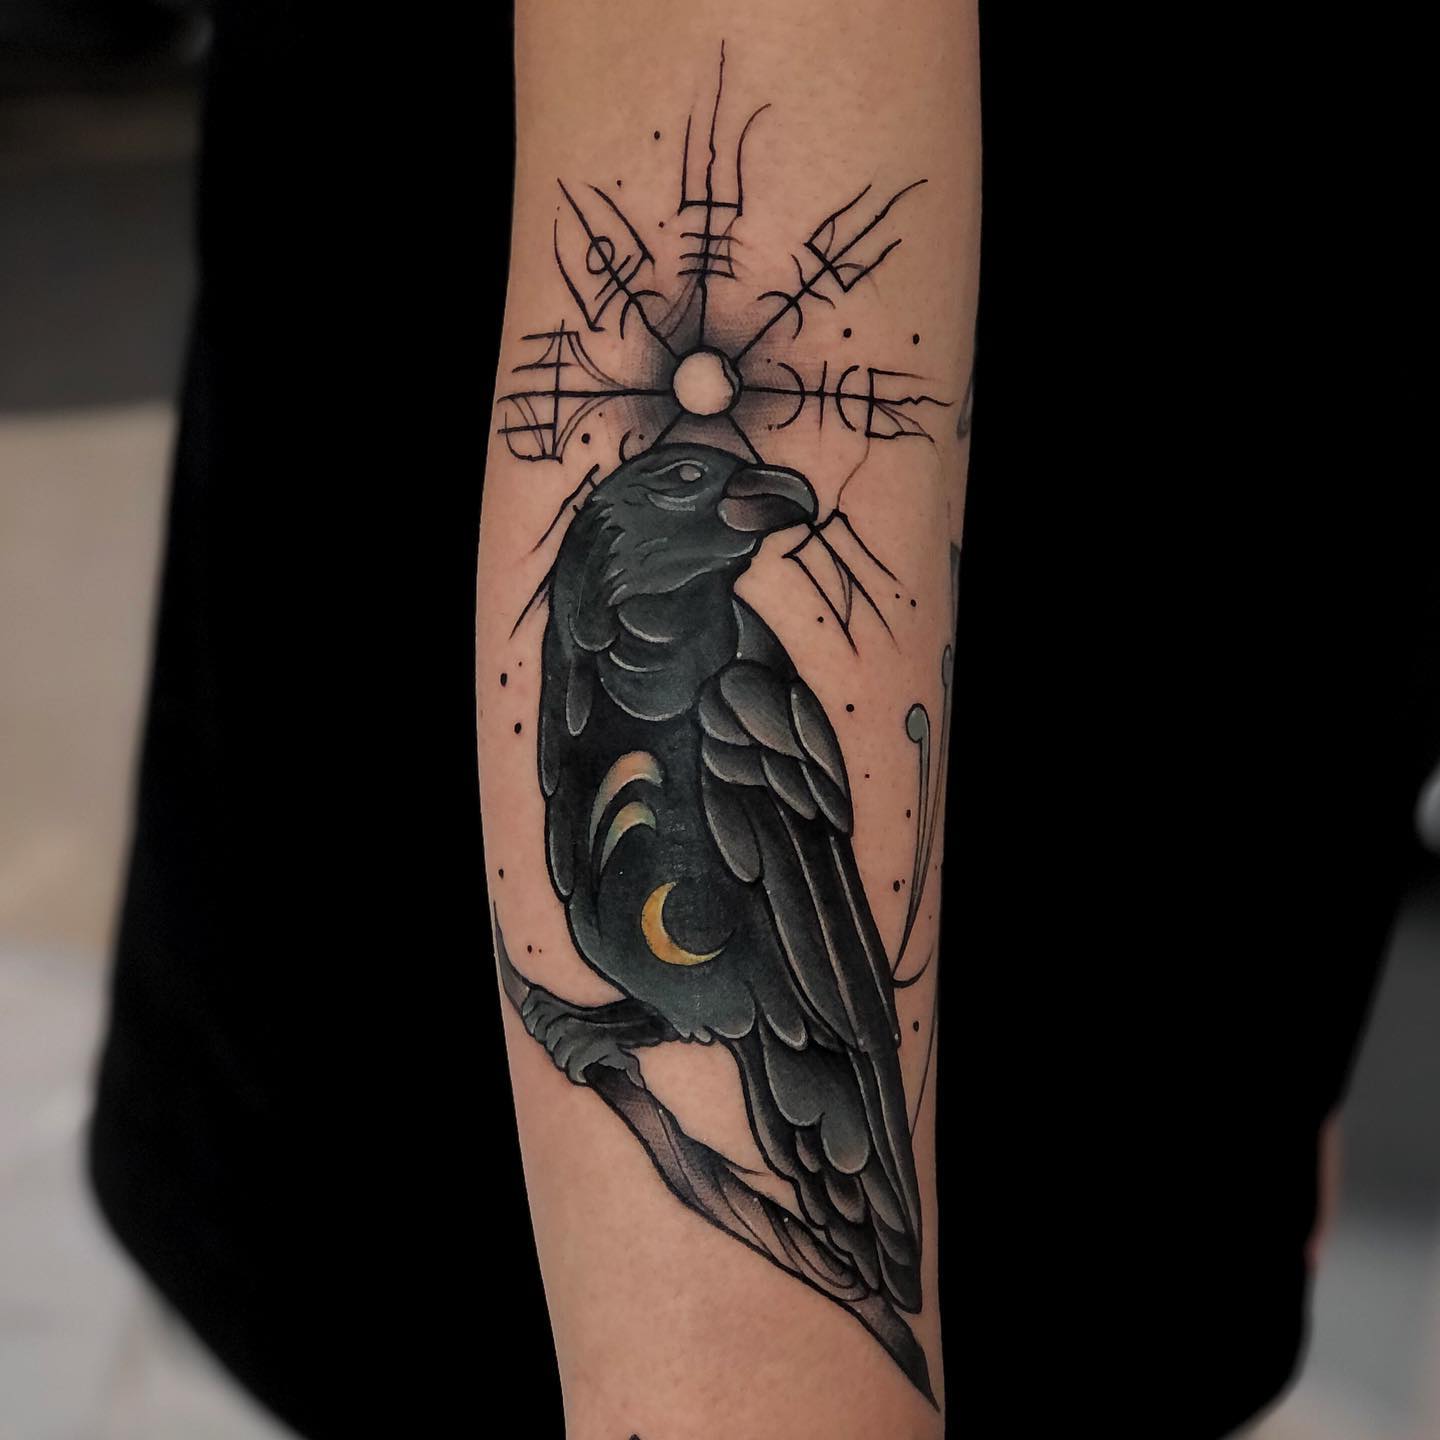 Amazing Nordic Raven Tattoo Designs and Meanings Inspired by Vikings - 34 Photo Ideas